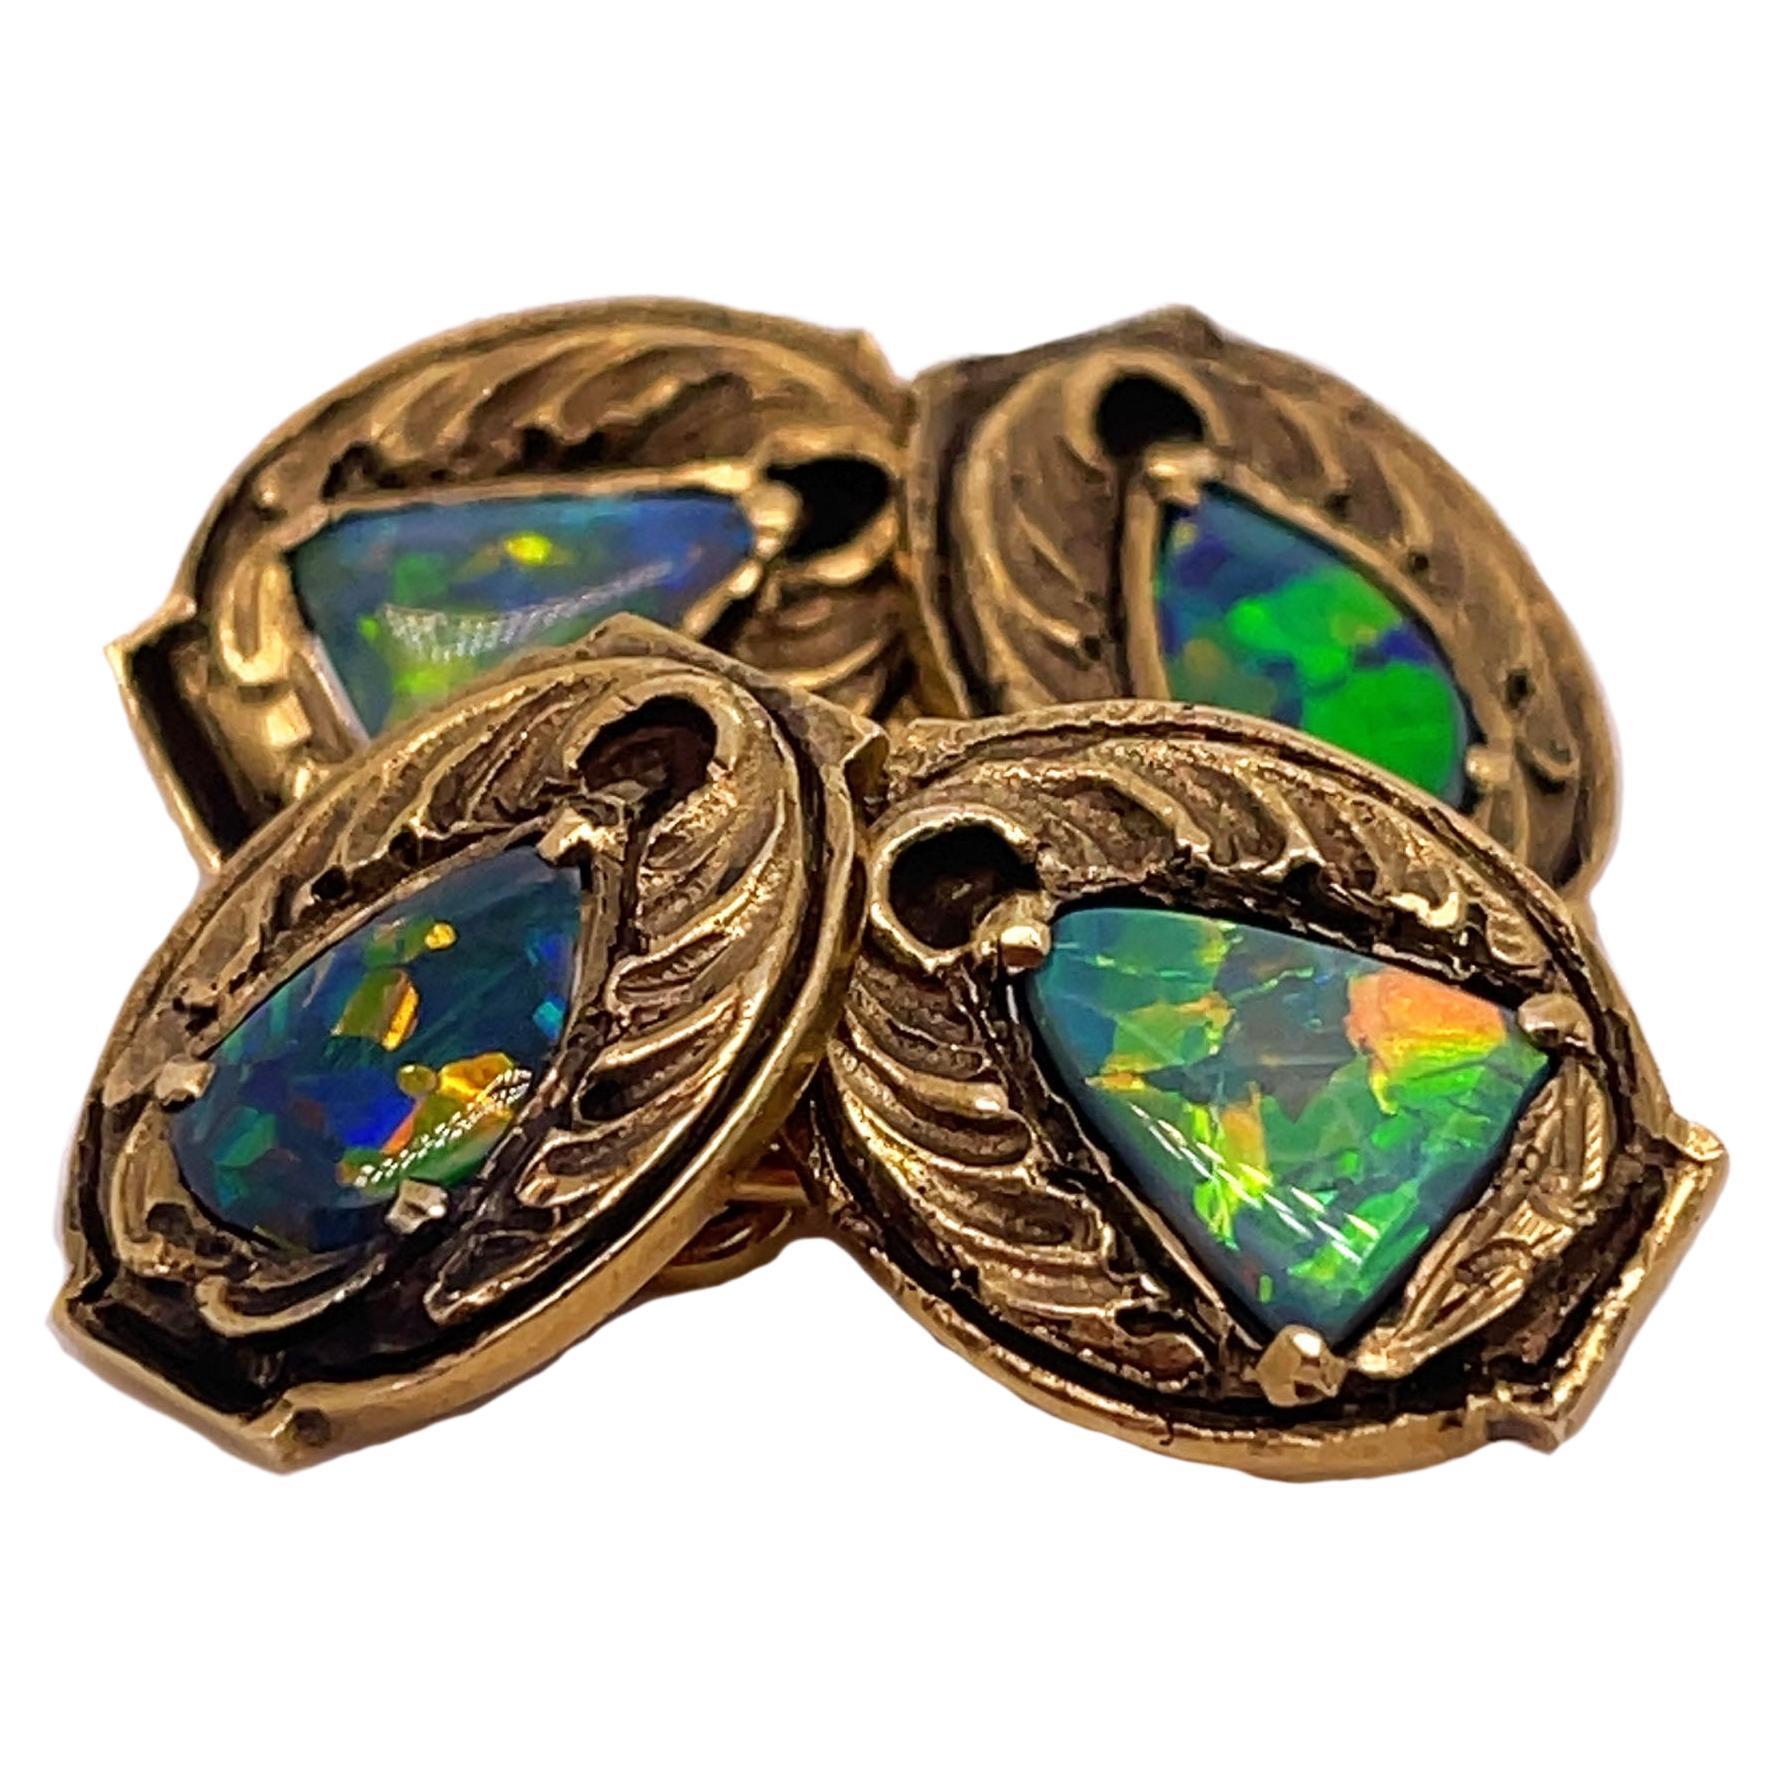 This is a spectacular pair of Arts & Crafts cufflinks signed by Walton & Co featuring gorgeous centerpieces of solid black opal. The detailing on these cufflinks is incredible, and the brilliant dimension of the black opal is the perfect complement